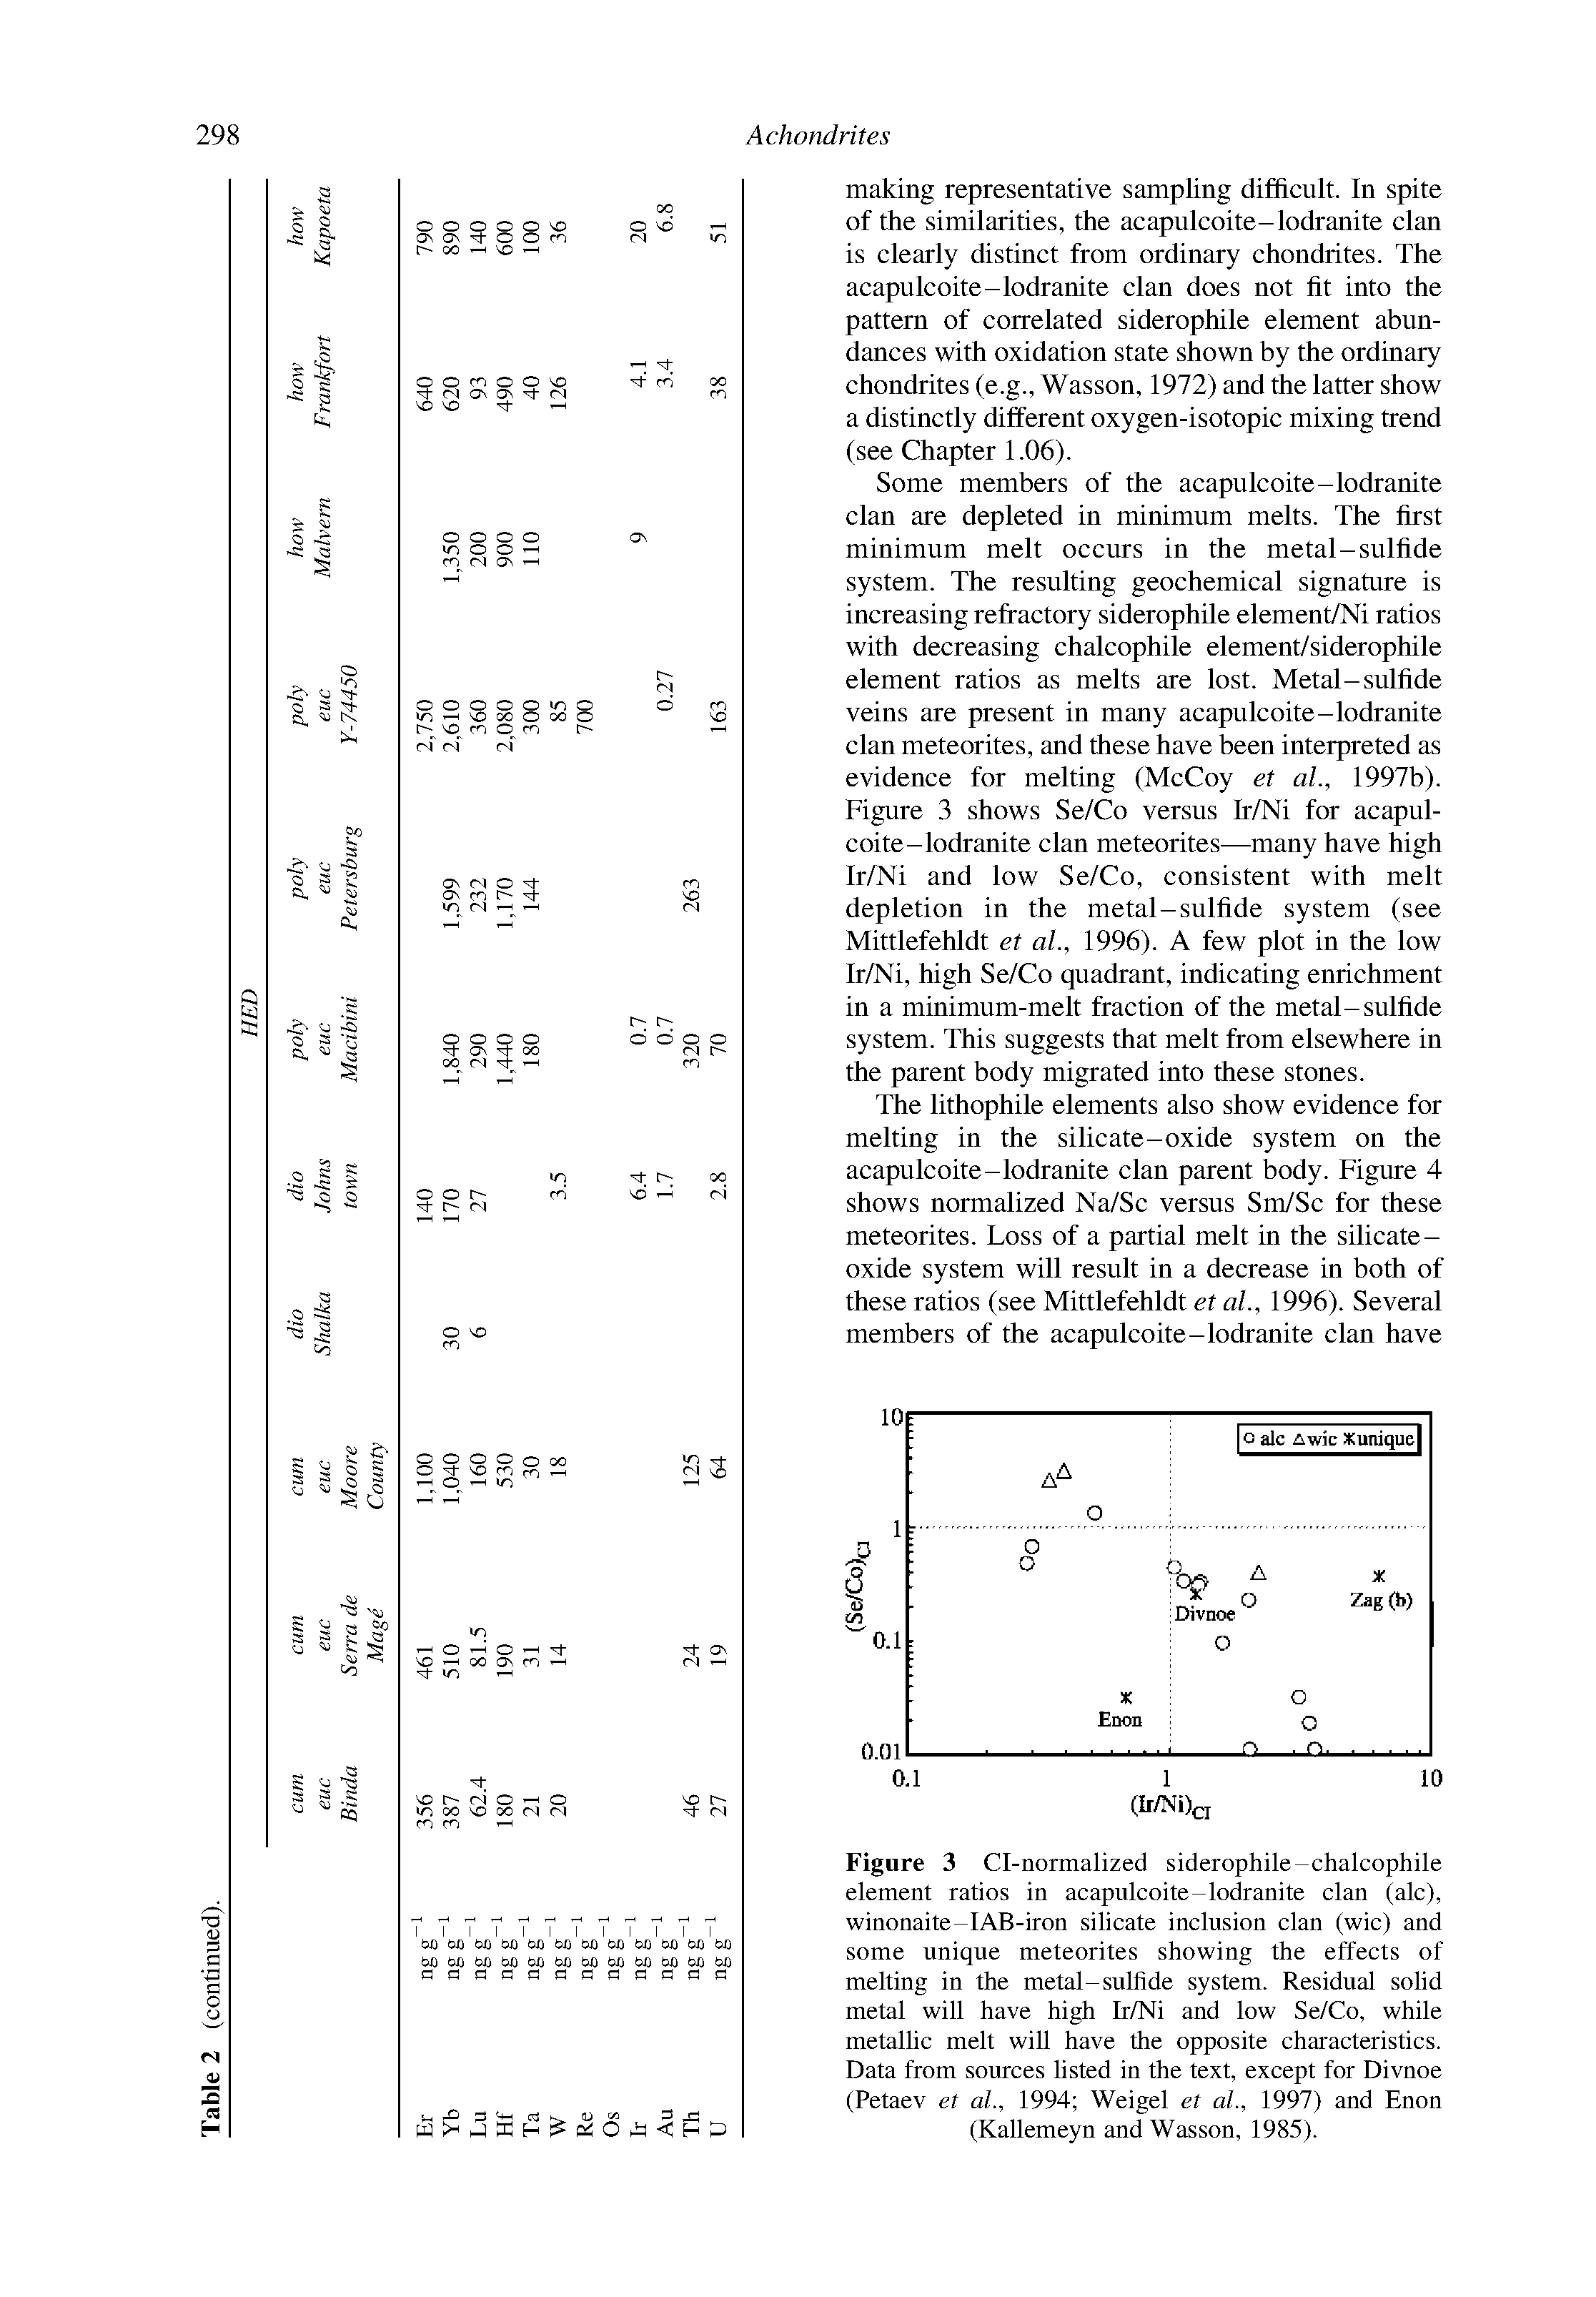 Figure 3 Cl-normalized siderophile-chalcophile element ratios in acapulcoite-lodranite clan (ale), winonaite-IAB-iron silicate inclusion clan (wic) and some unique meteorites showing the effects of melting in the metal-sulhde system. Residual solid metal will have high Ir/Ni and low Se/Co, while metallic melt will have the opposite characteristics. Data from sources listed in the text, except for Divnoe (Petaev et al., 1994 Weigel et al., 1997) and Enon (Kallemeyn and Wasson, 1985).